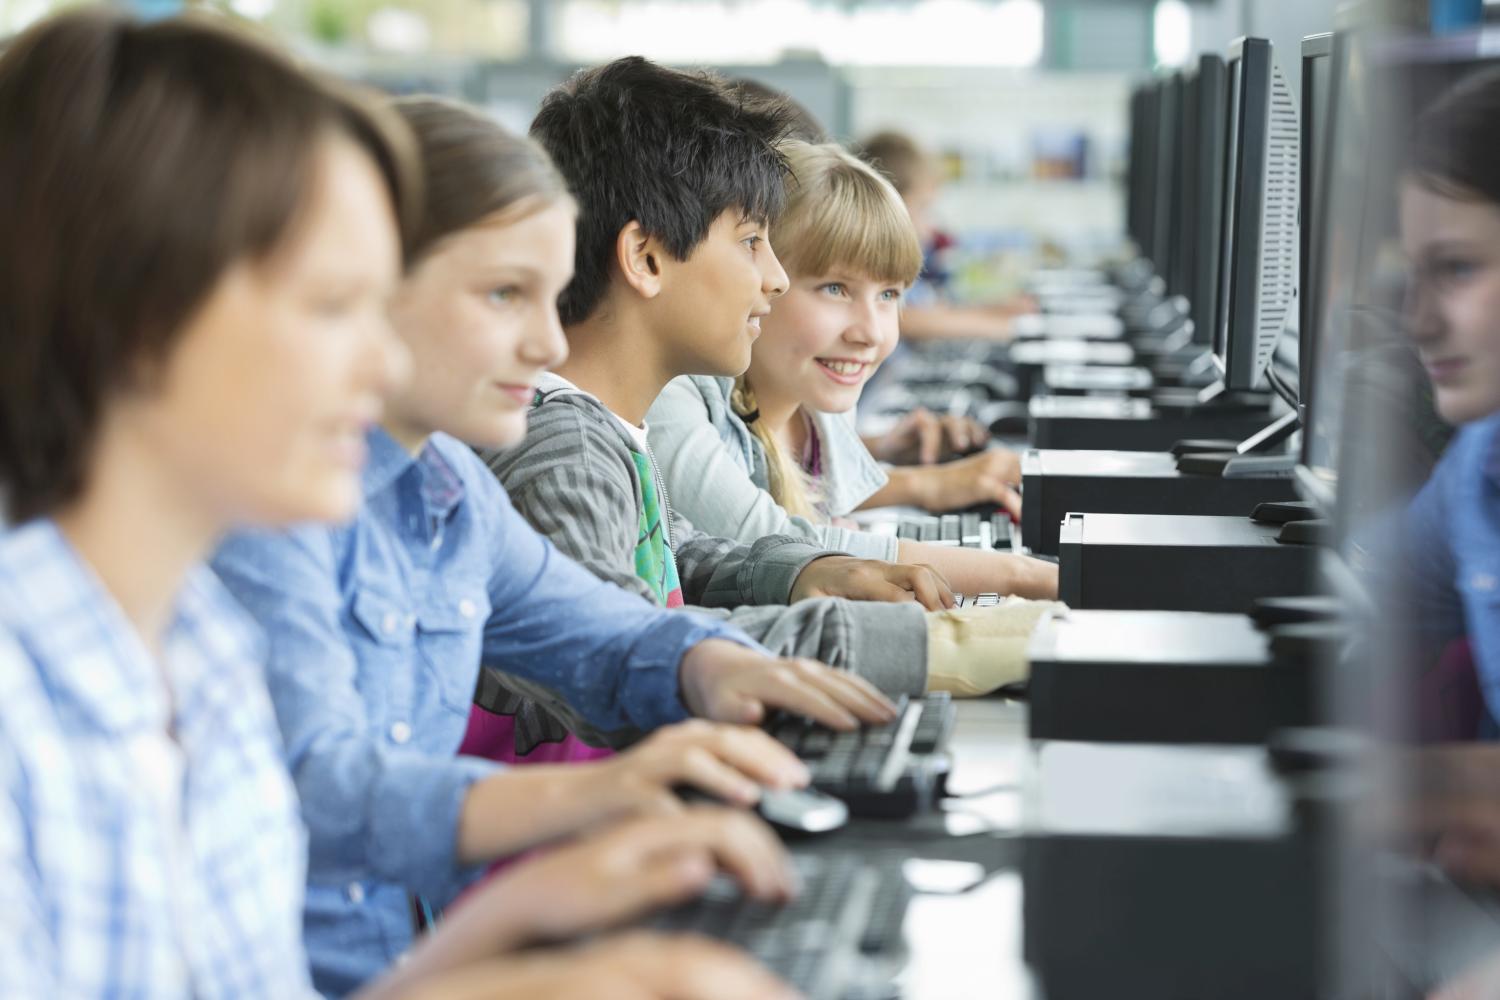 Are You Embarrassed By Your german game making school Skills? Here's What To Do